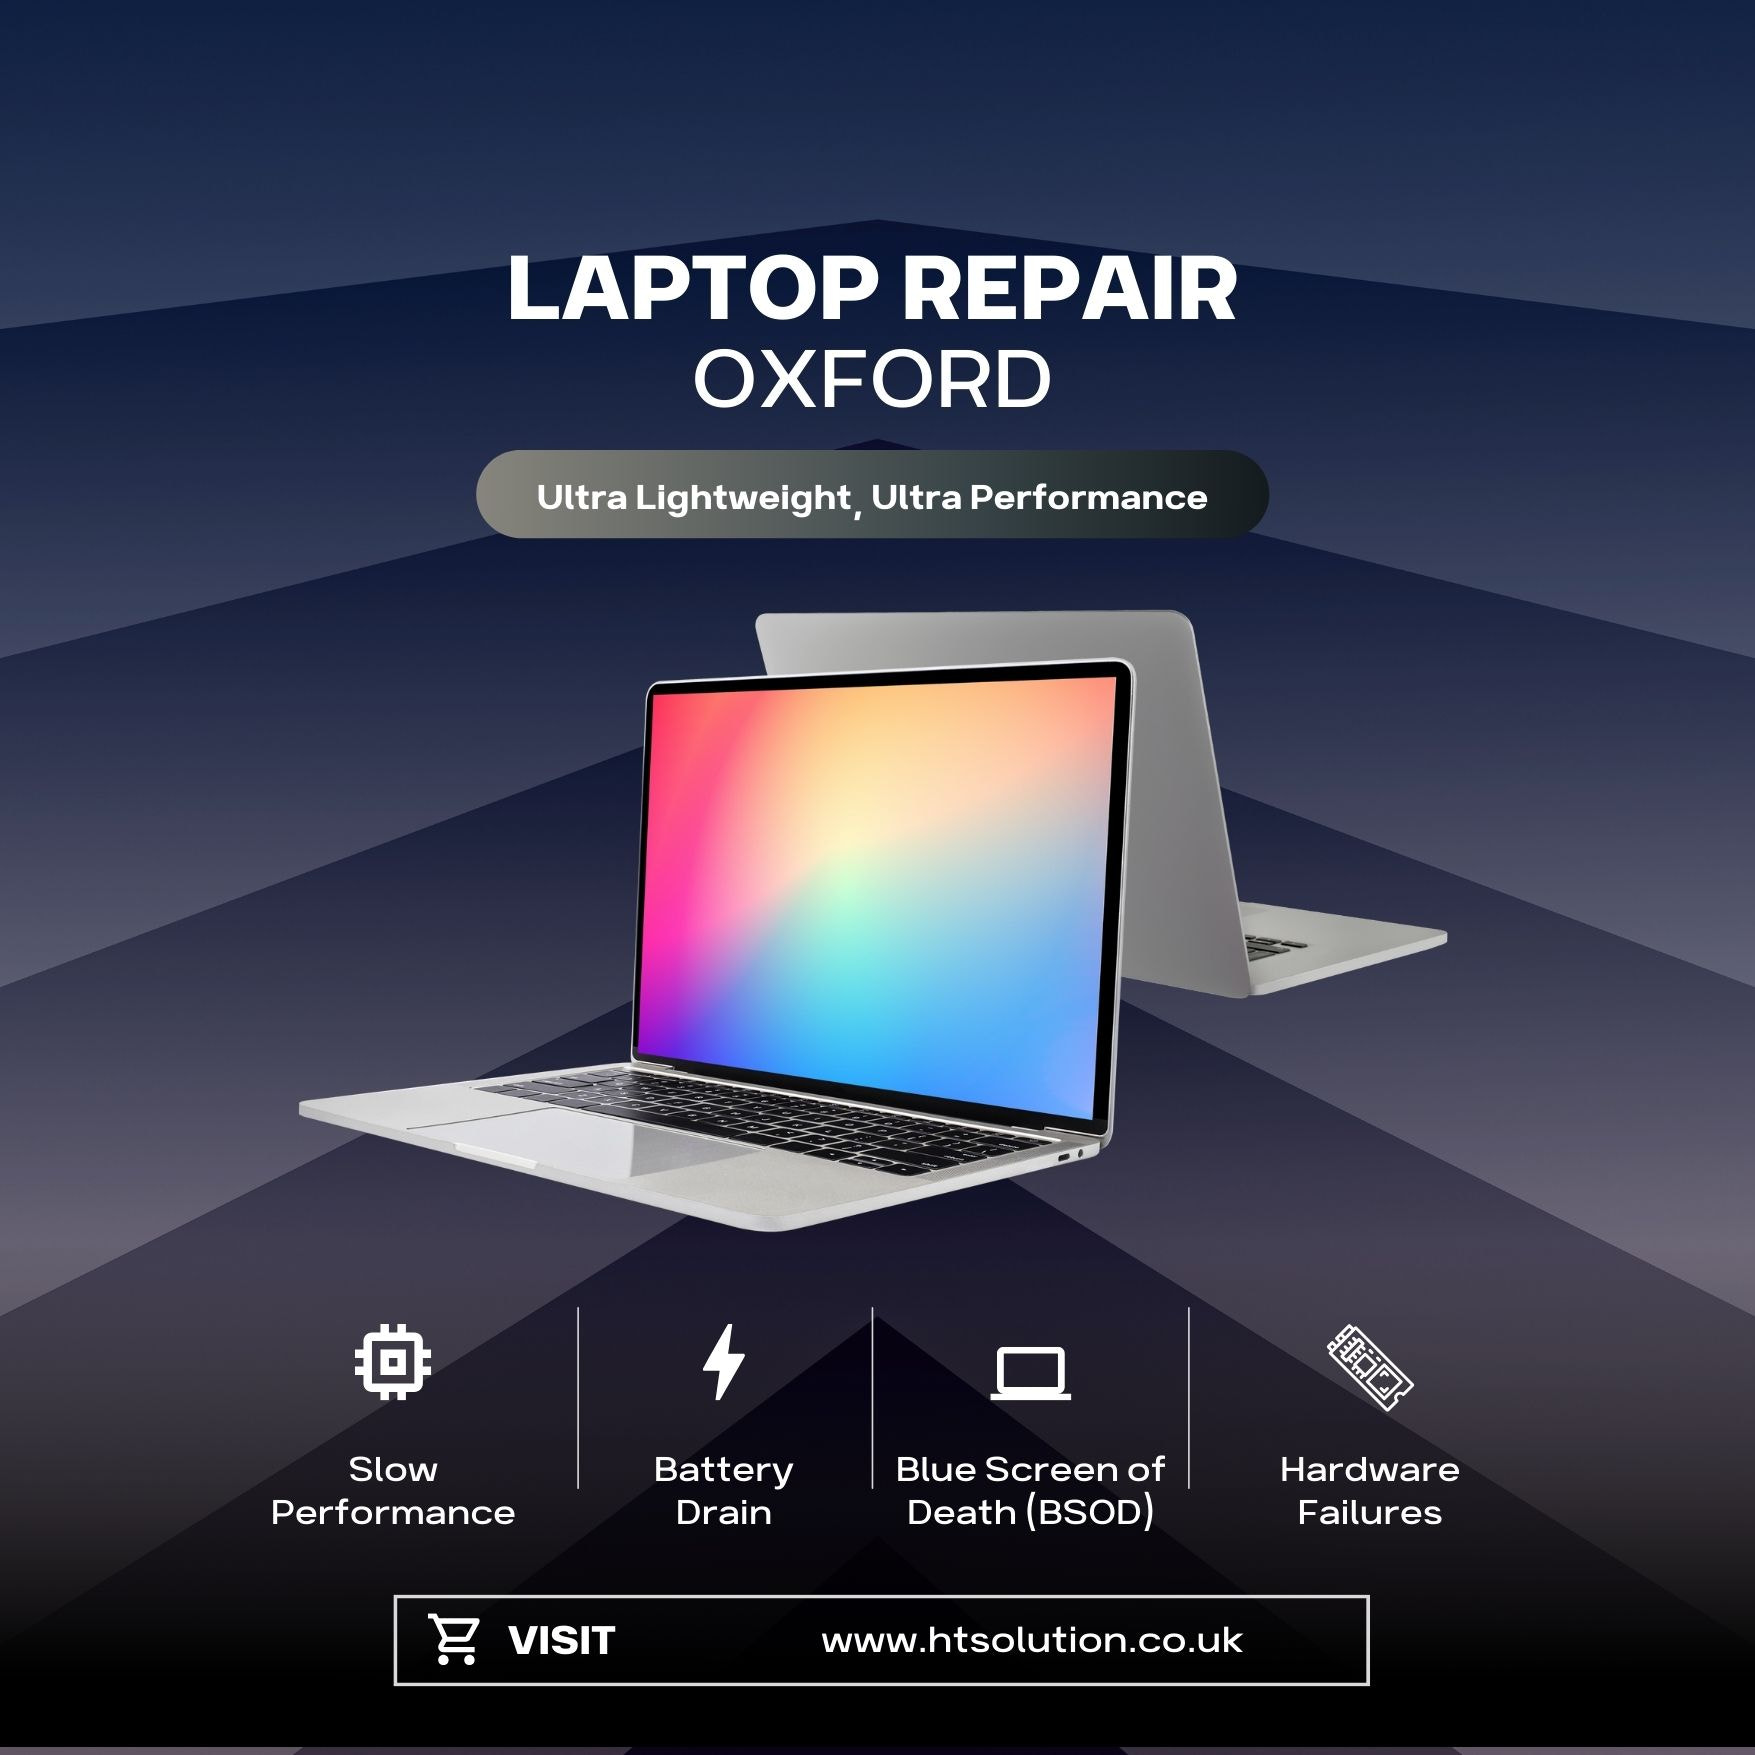 The Ultimate Guide to 24/7 Laptop Repair Oxford - Hitecsolutions